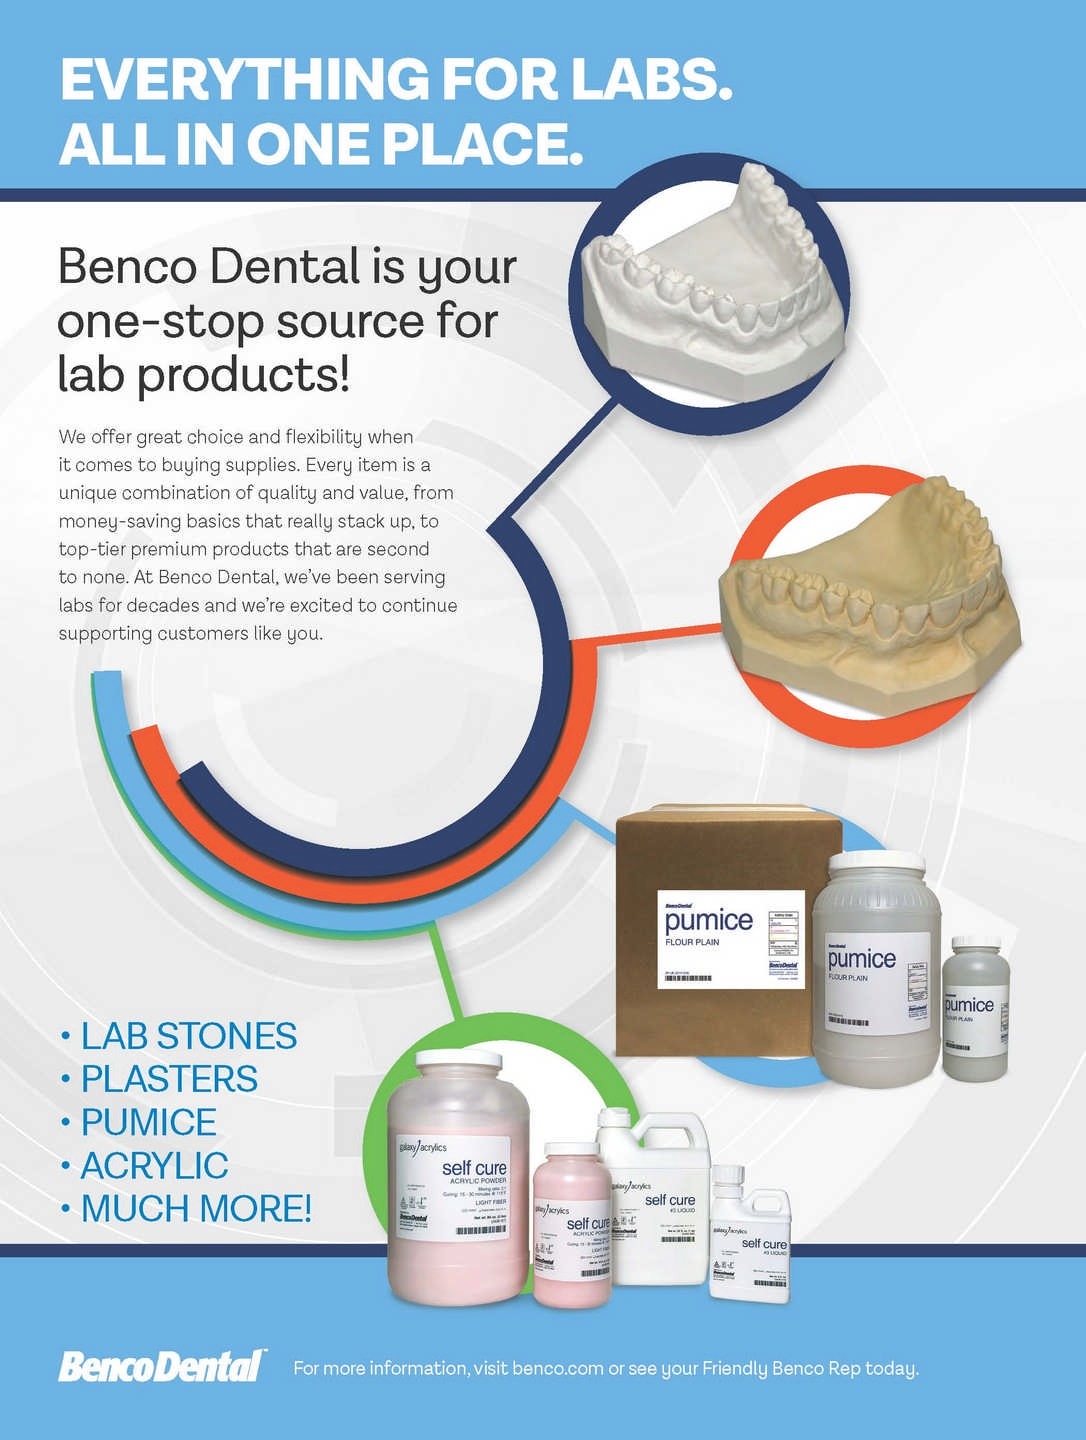 A promotional image depicting some of the lab products offered by Benco Dental. 